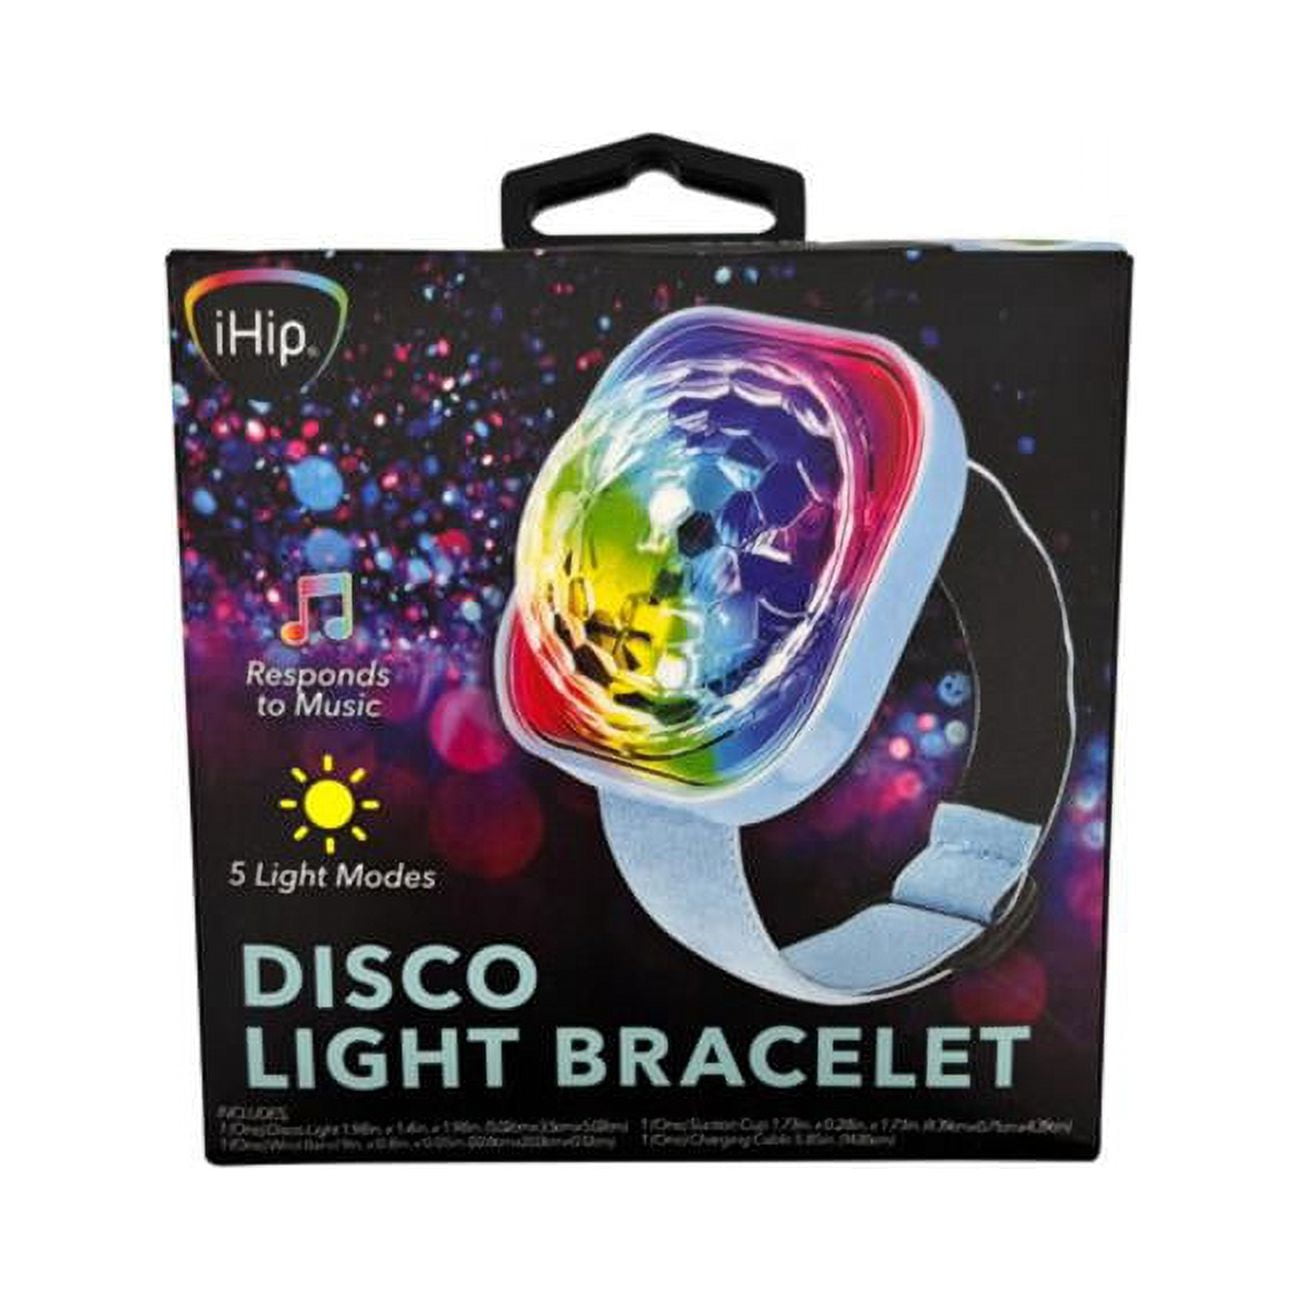 iHip Rechargeable RGB Disco Light Projector Bracelet Pack of 24 53a1446e e2a8 4c23 a494 0667d85524dd.7d28f089e906de74b06ac7e52f72e90a